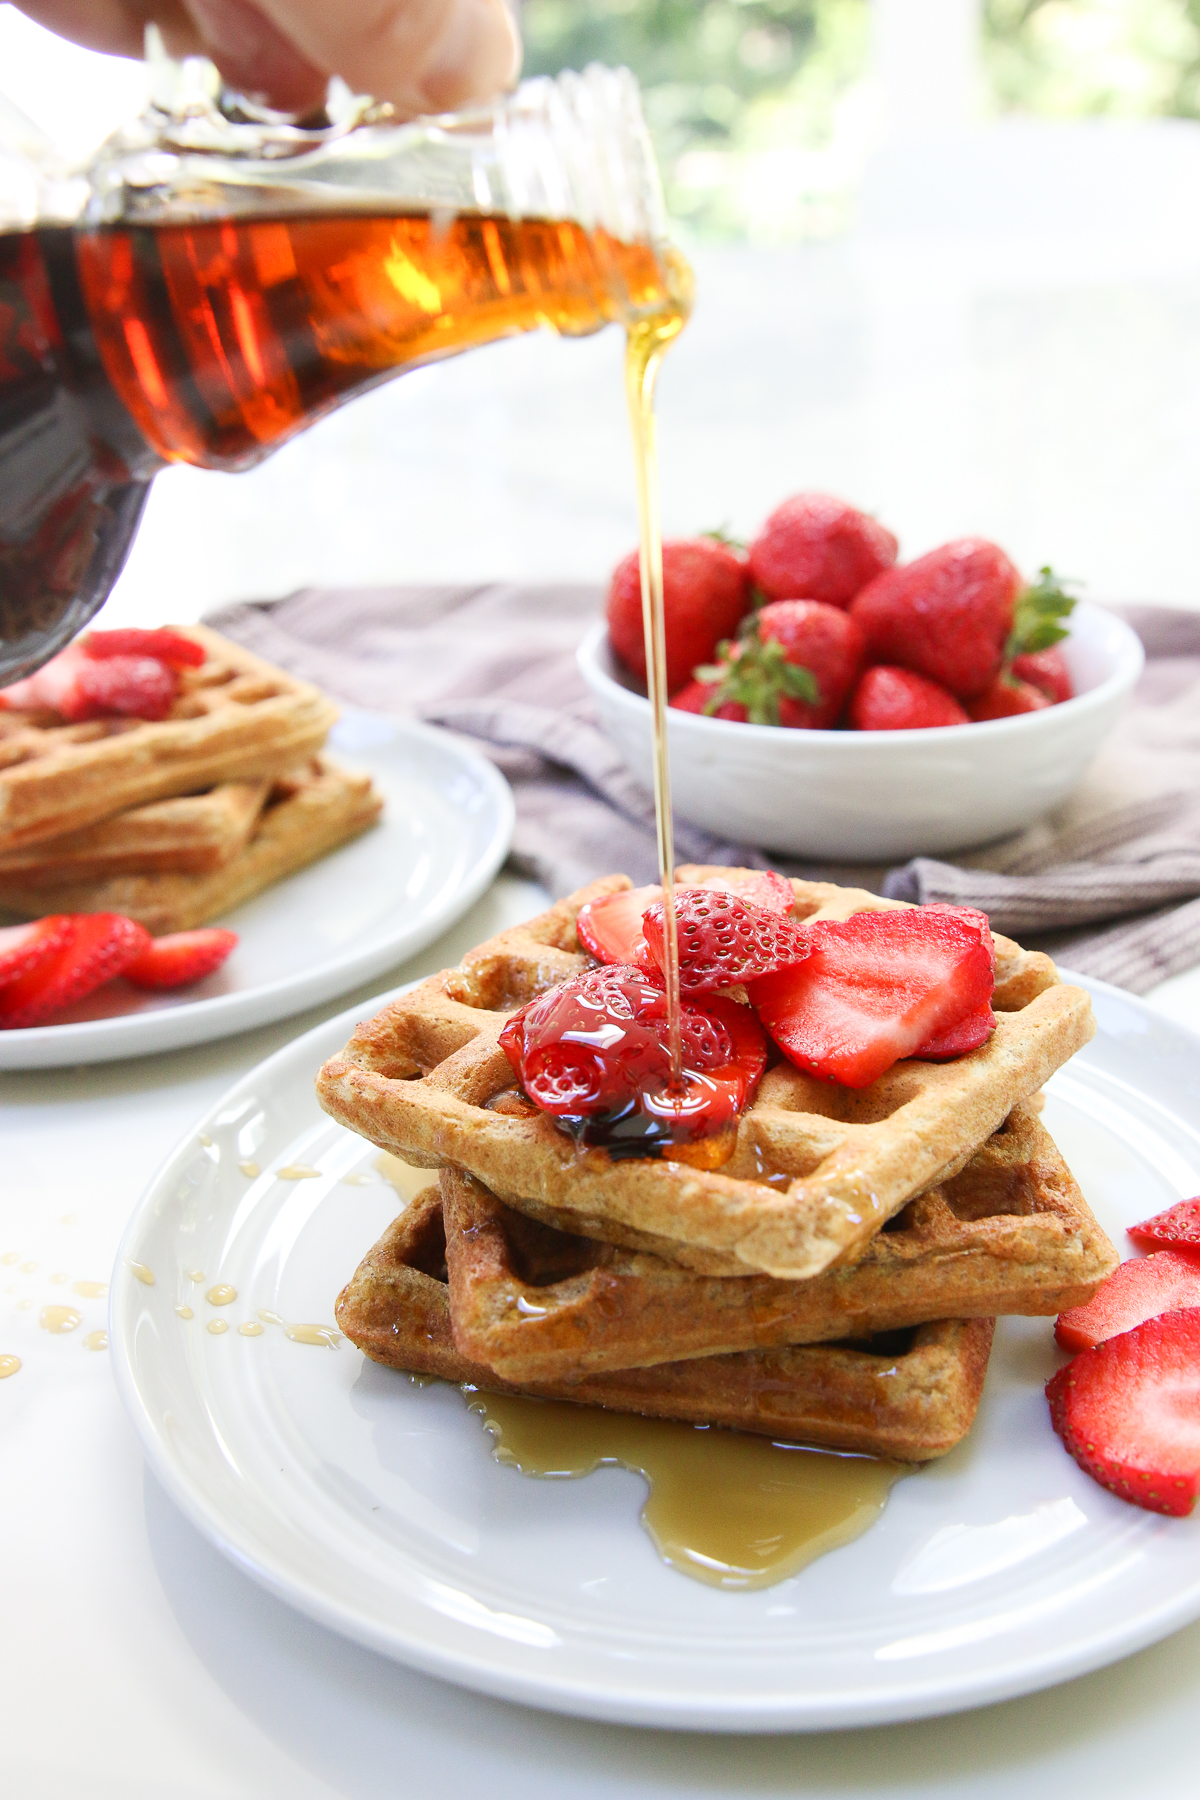 Kernza Waffles + Local Syrup For a Breakfast Win